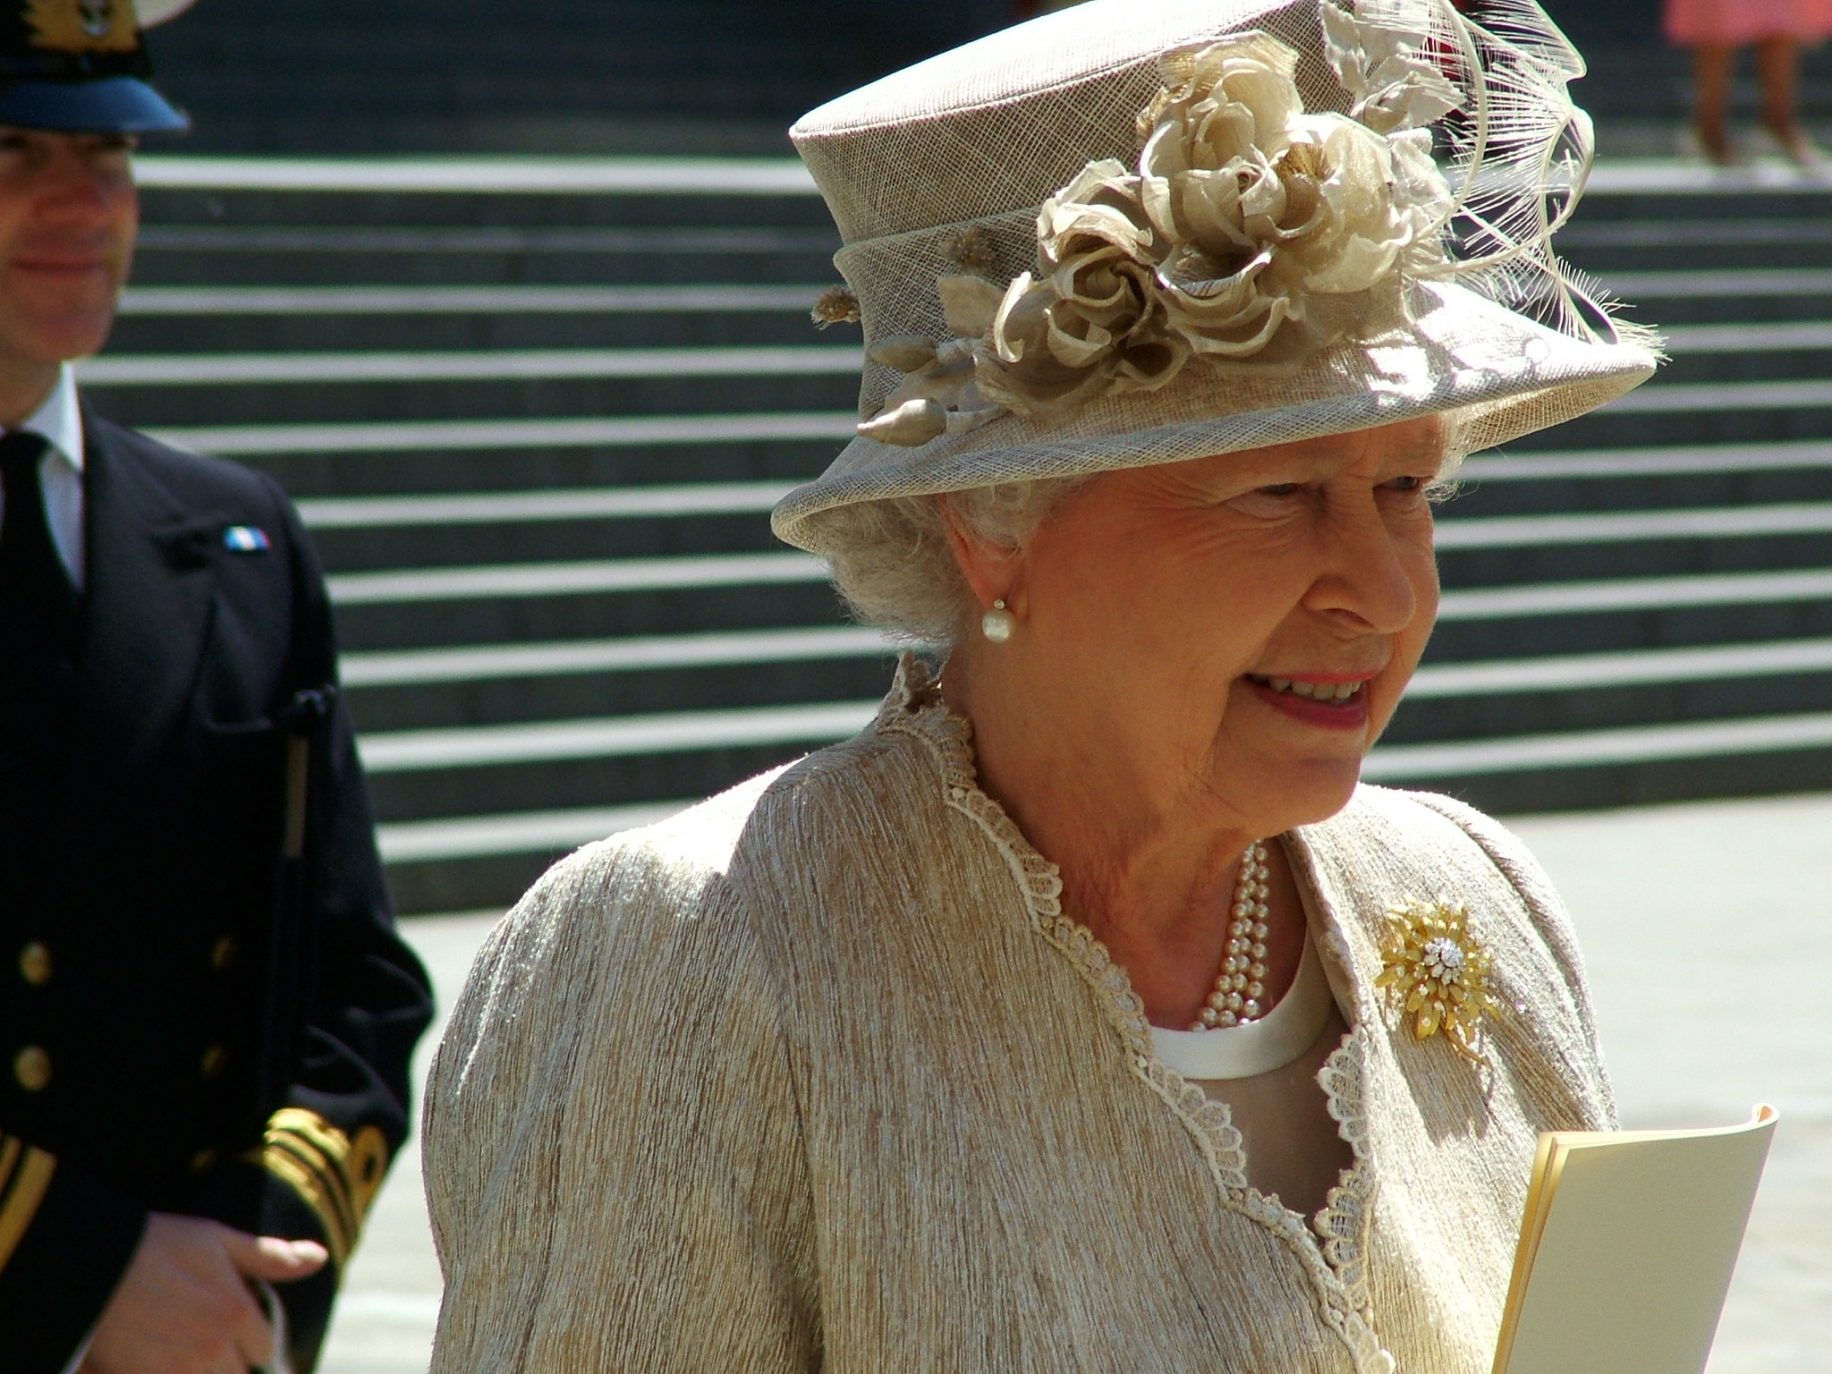 Queen Elizabeth II marks 94th birthday without fanfare | American ...